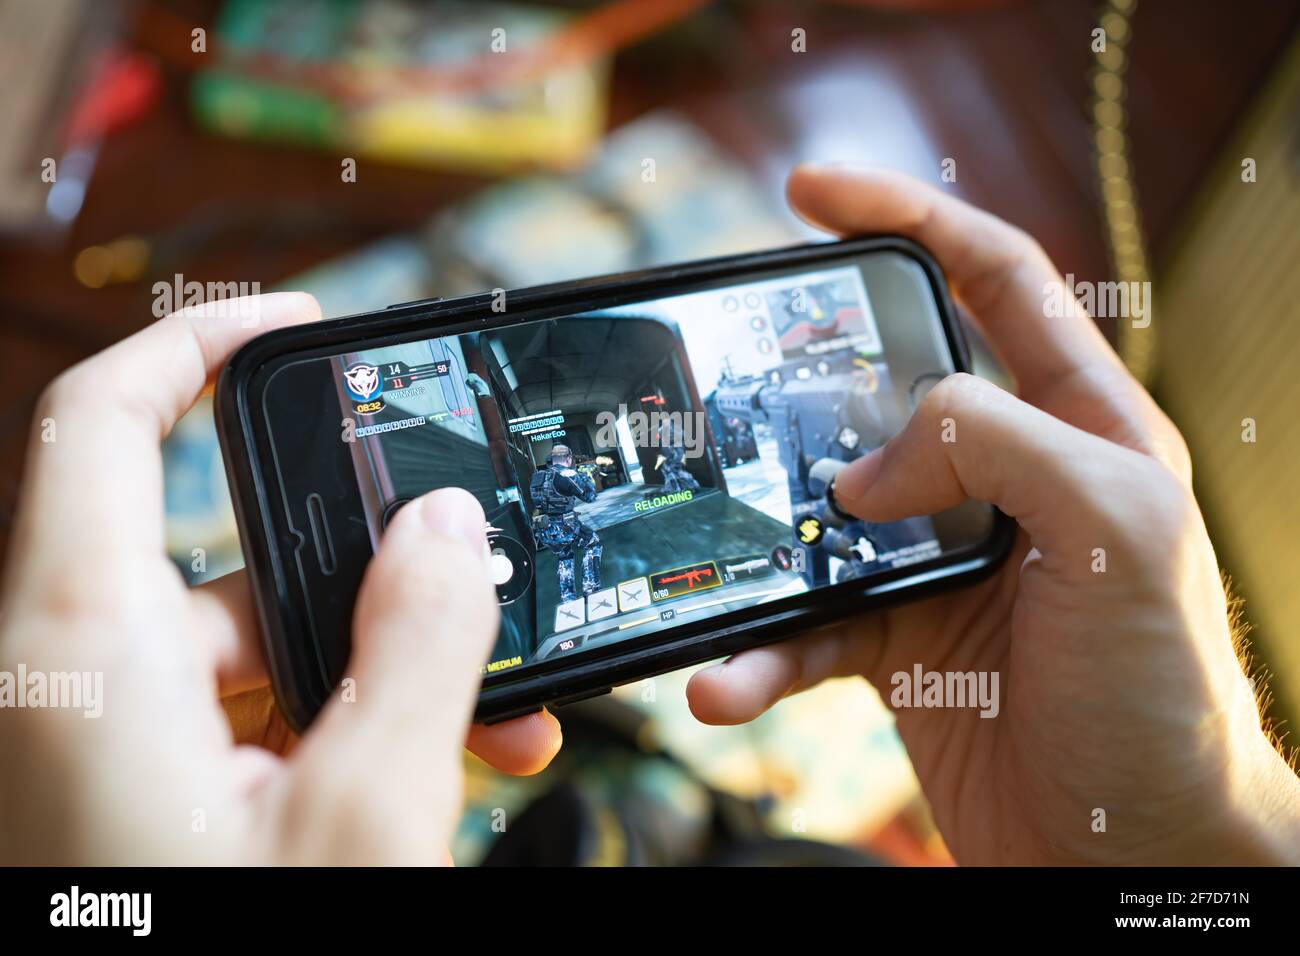 Bangkok, Thailand - April 6, 2021 : A man playing Call of Duty Mobile game on iPhone 7. Stock Photo